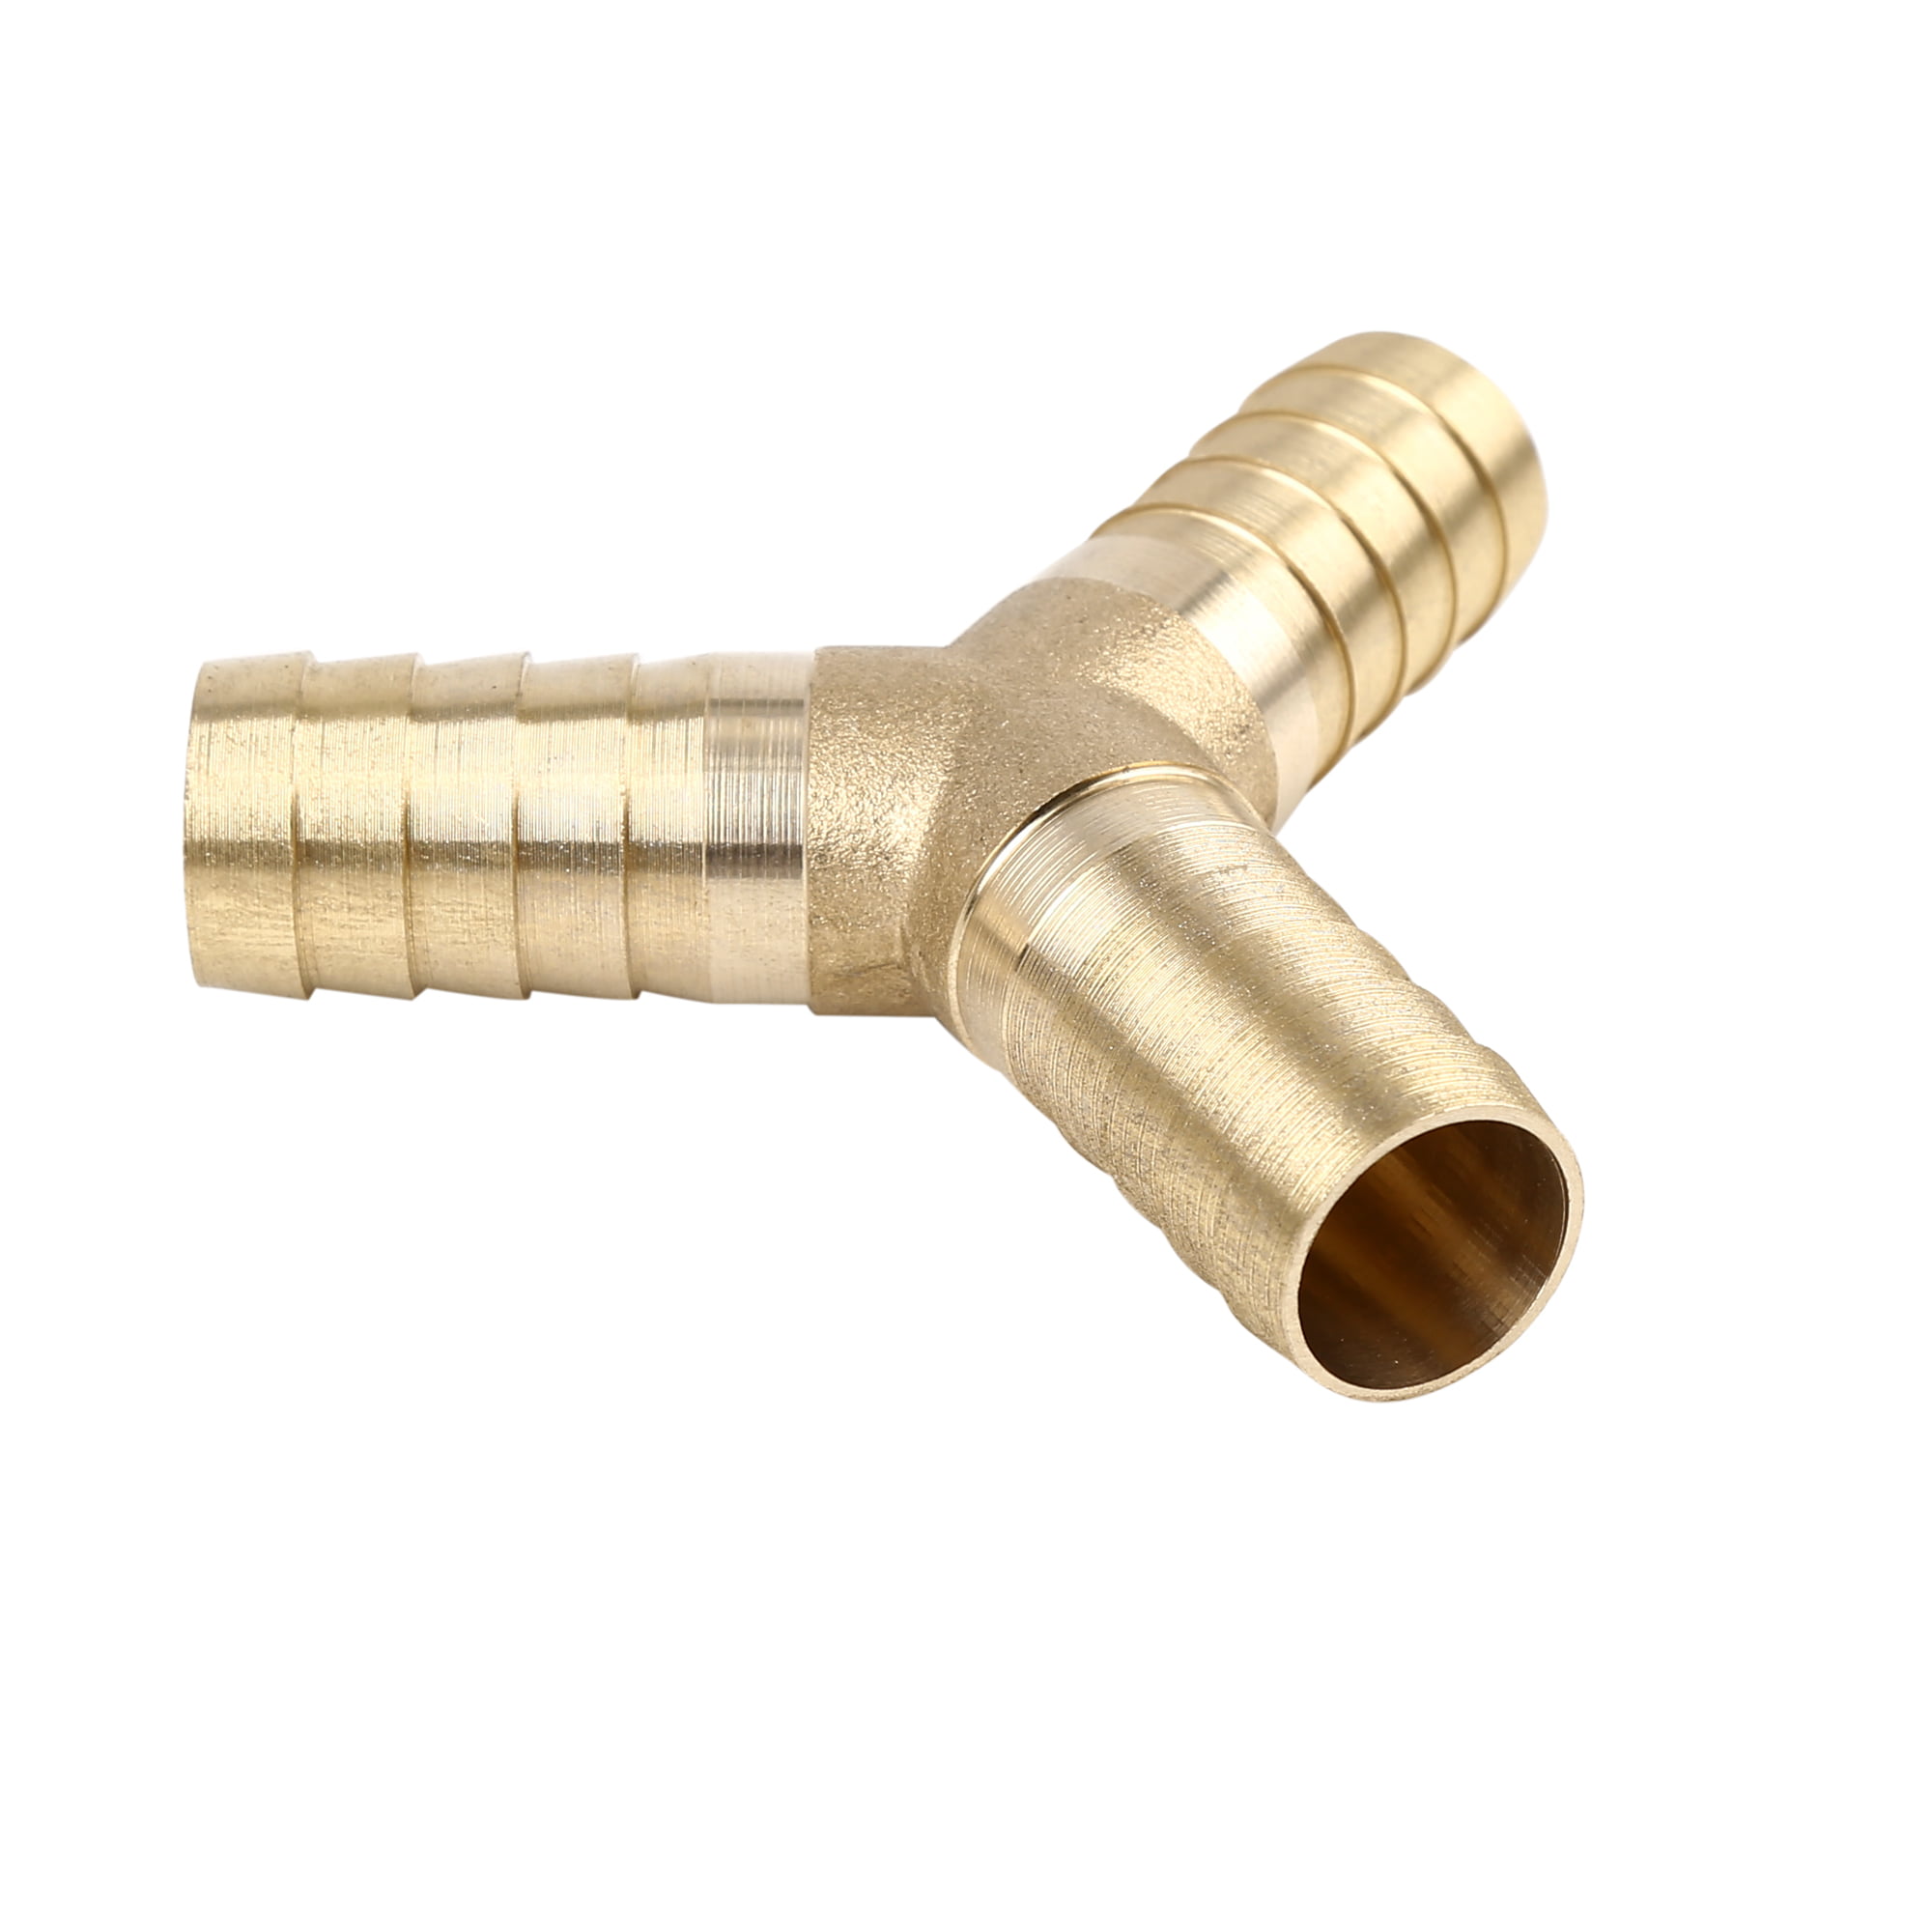 Brass 'Y' Hose Joiner Barbed Splitter Connector Air Fuel Water Pipe Tubing 